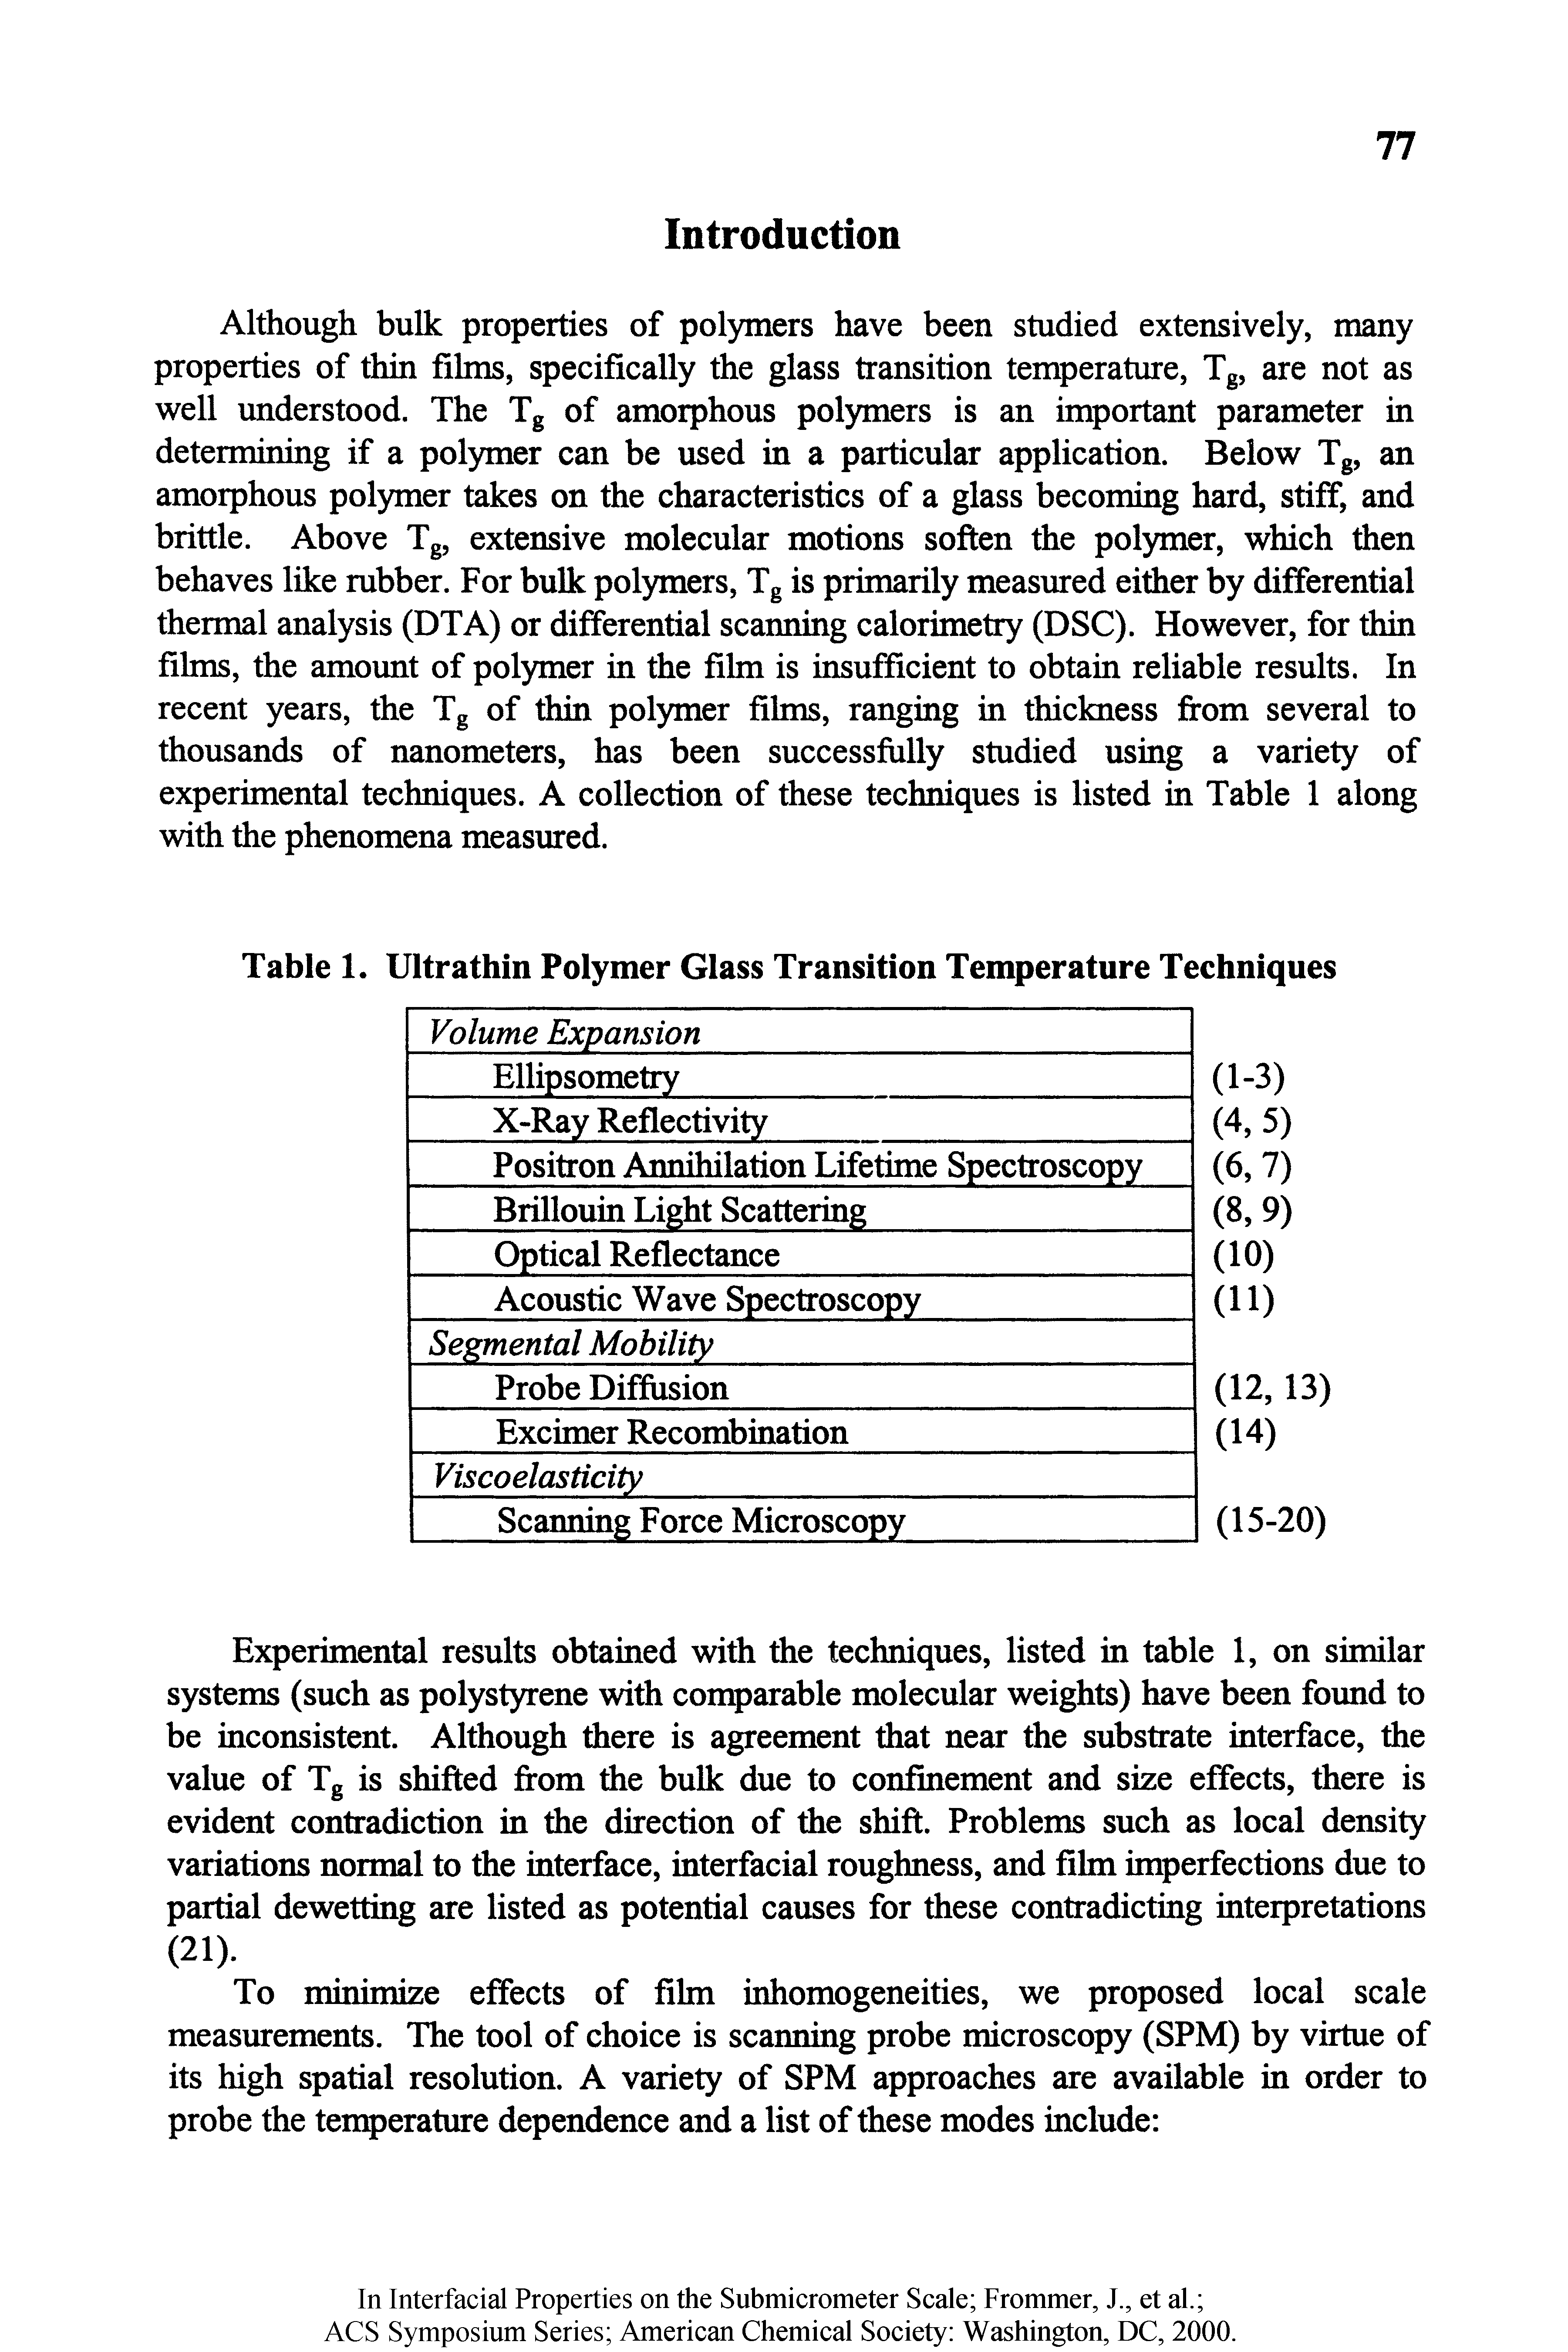 Table 1. Ultrathin Polymer Glass Transition Temperature Techniques...